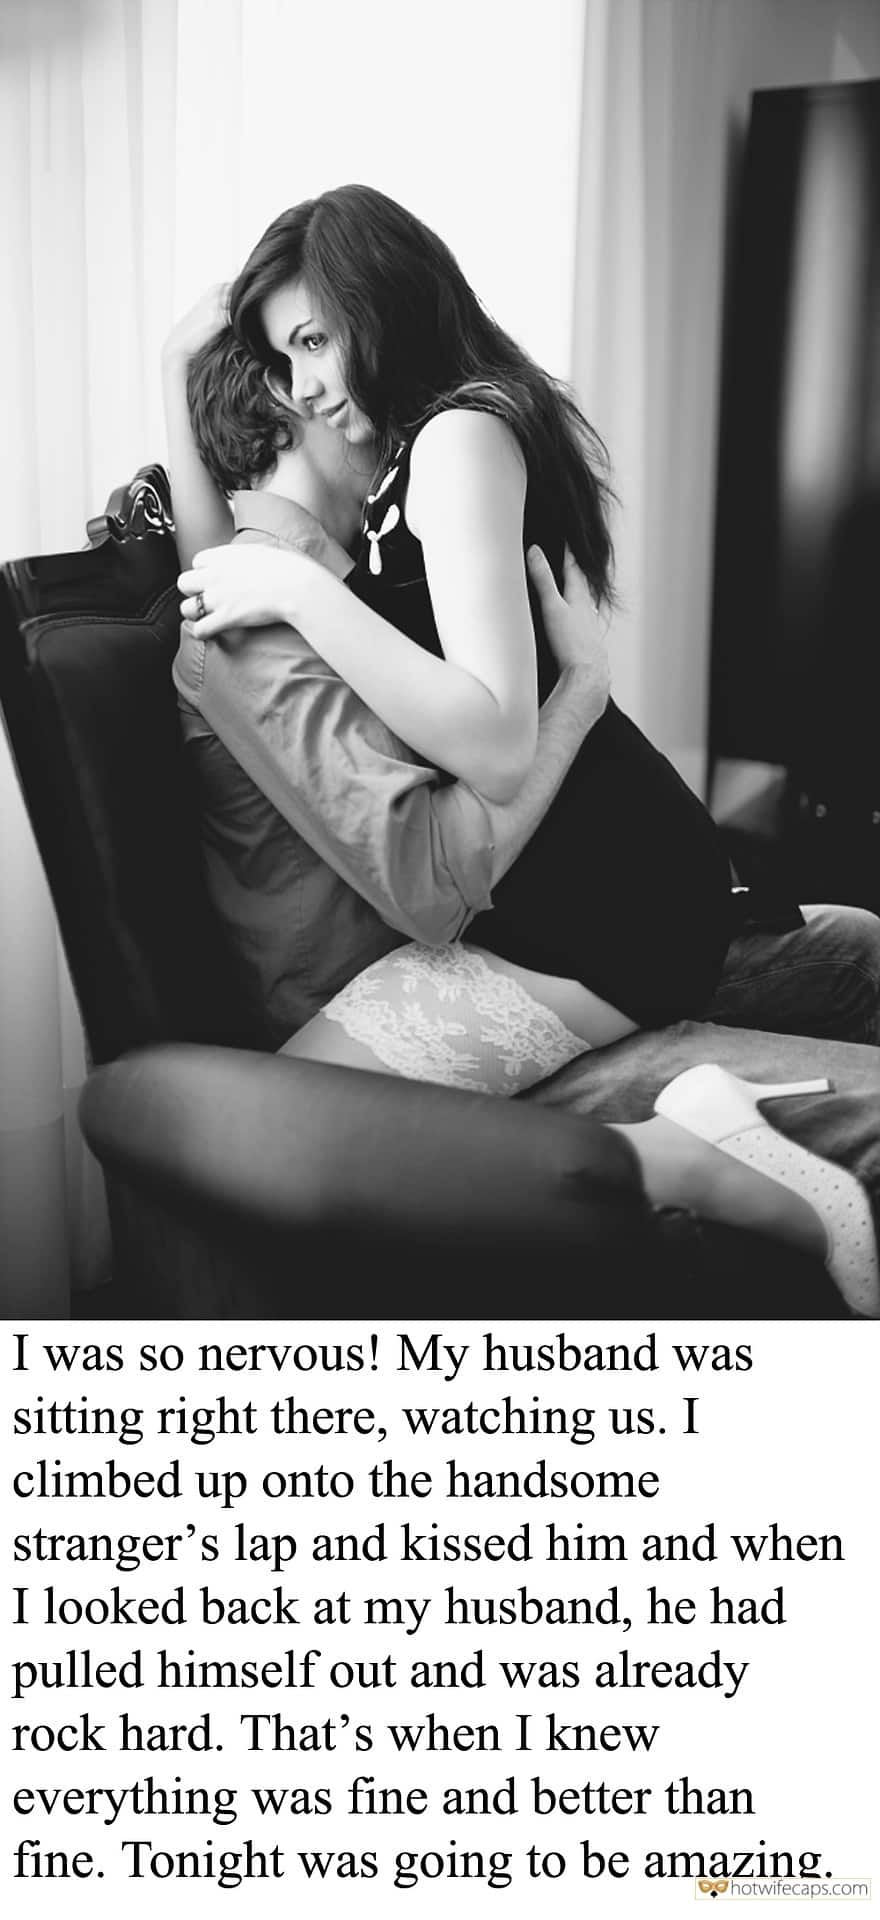 Wife Sharing Sexy Memes Cuckold Stories hotwife caption: I was so nervous! My husband was sitting right there, watching us. I climbed up onto the handsome stranger’s lap and kissed him and when I looked back at my husband, he had pulled himself out and was already rock...